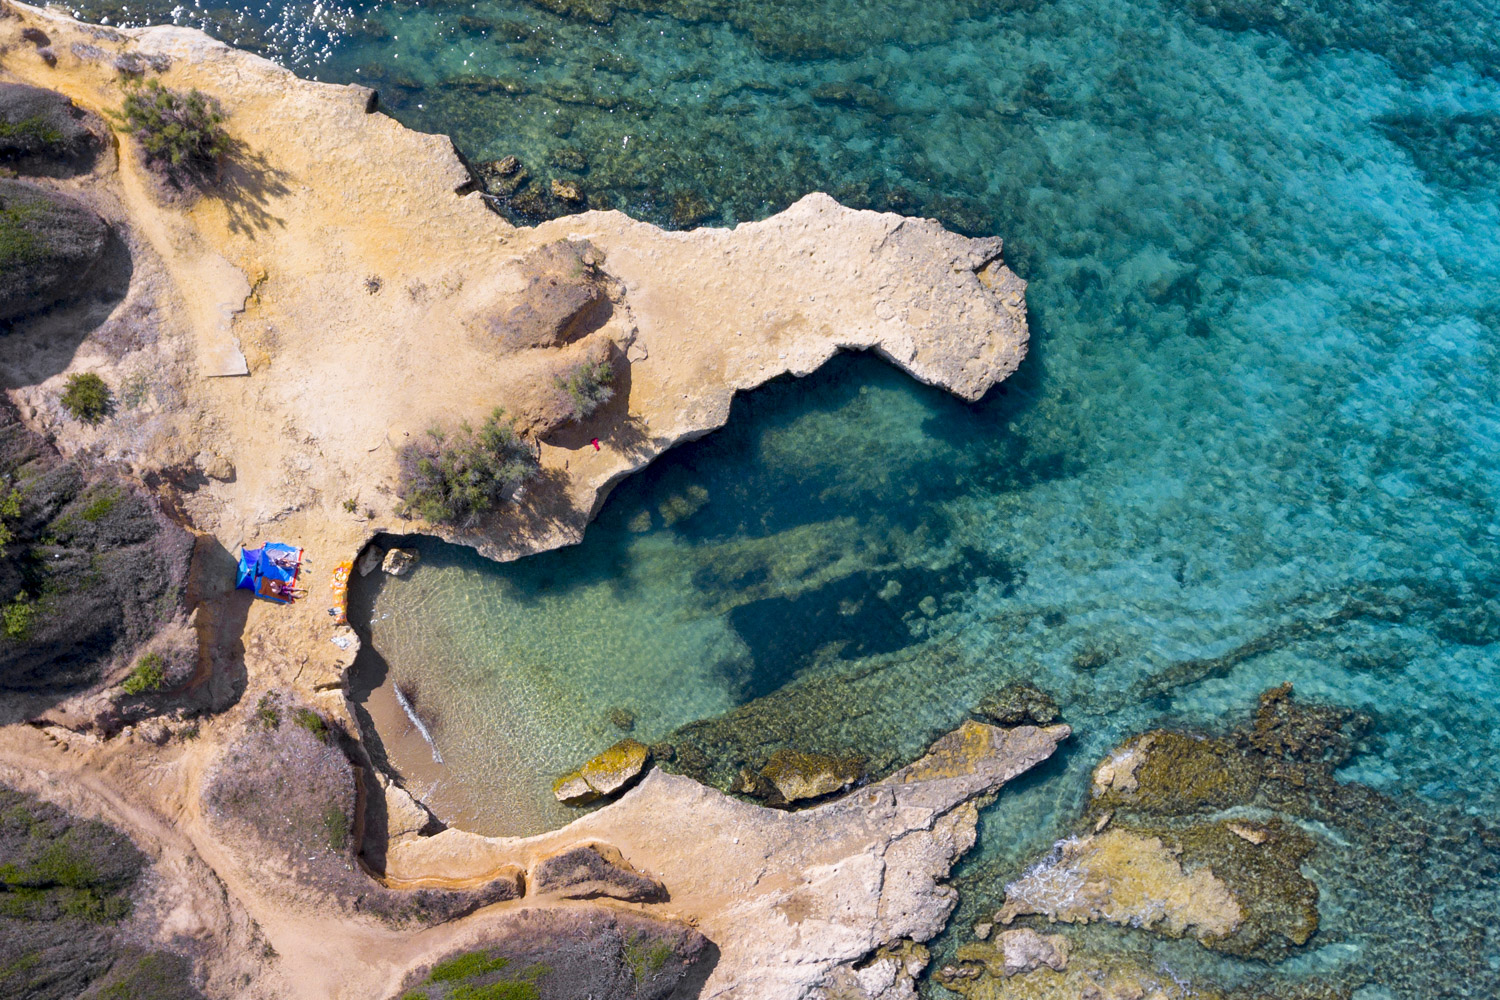  Aerial Photography of Puglia Region, Italy by Joas Souza Photographer - All Rights Reserved. 